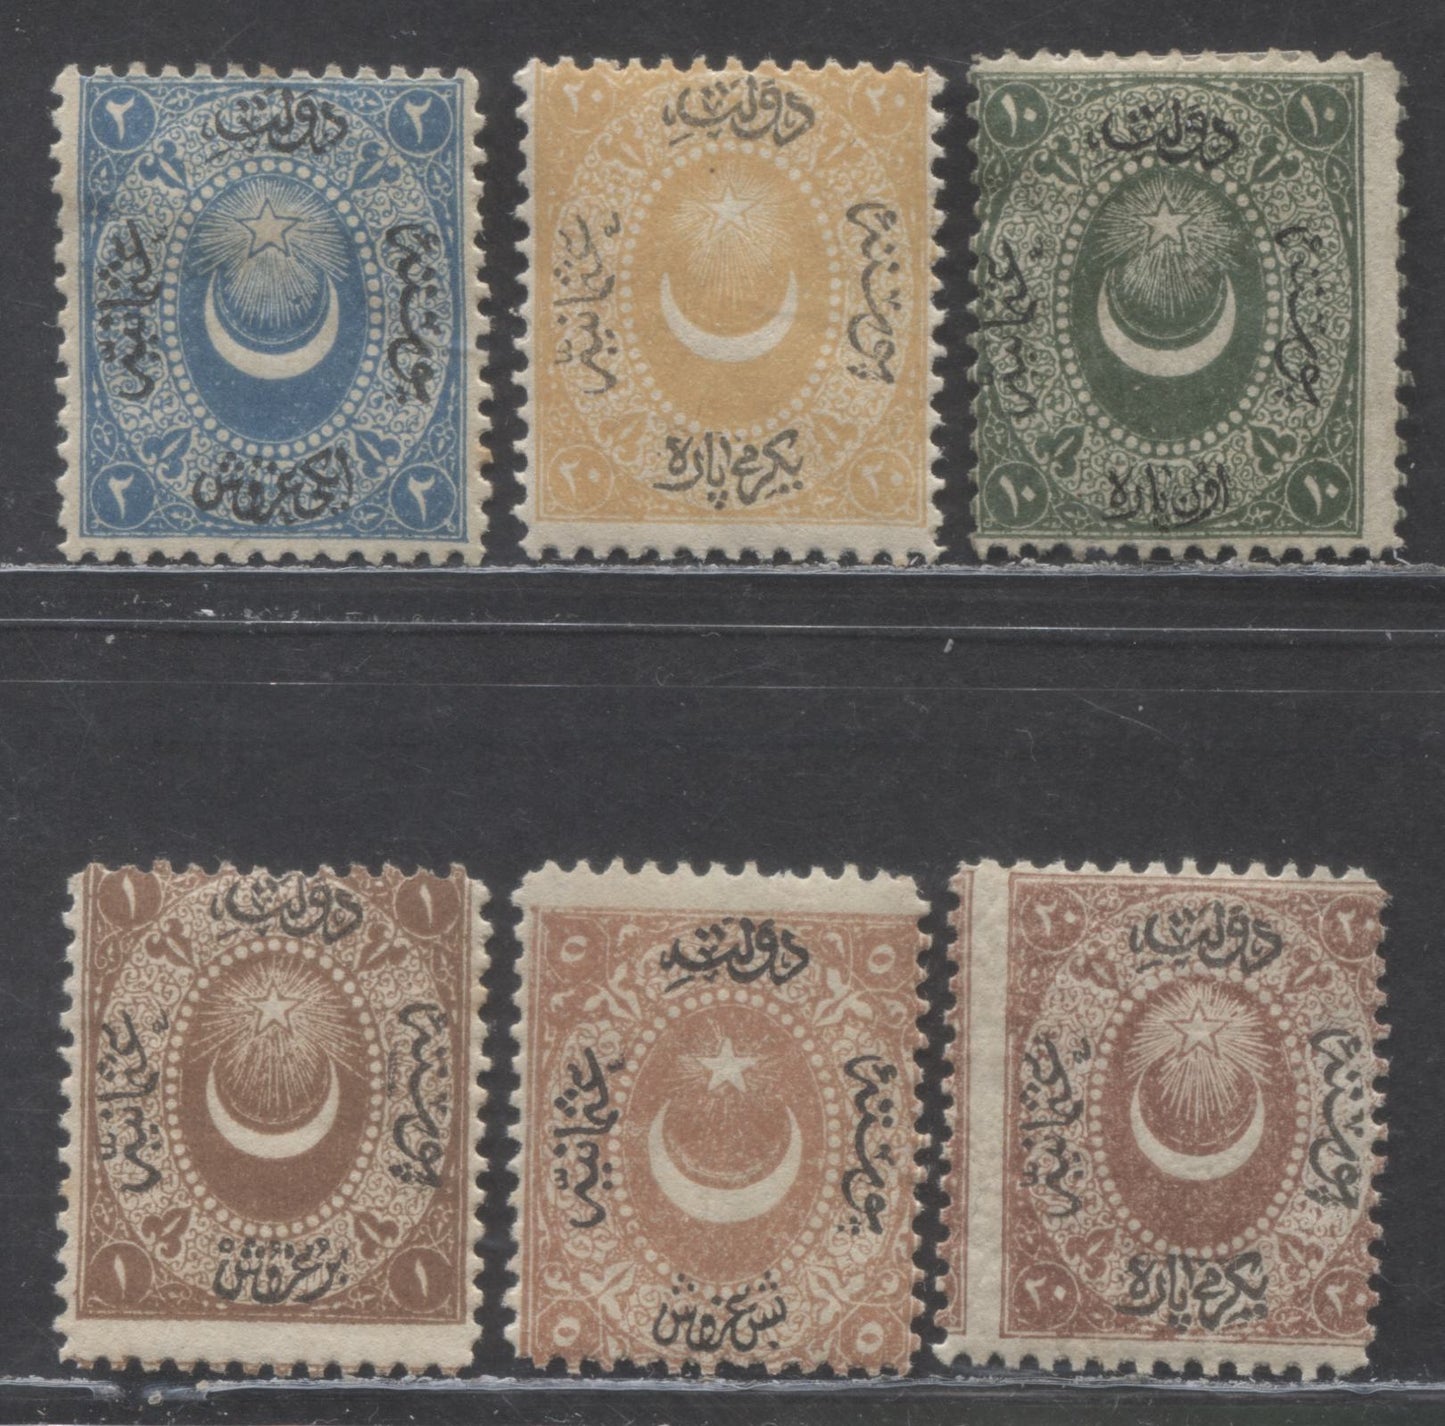 Lot 348 Turkey SC#8/J9 1865 Duloz Issue, Genuines, 6 VG/FOG Singles, Click on Listing to See ALL Pictures, 2022 Scott Classic Cat. $37.5 USD